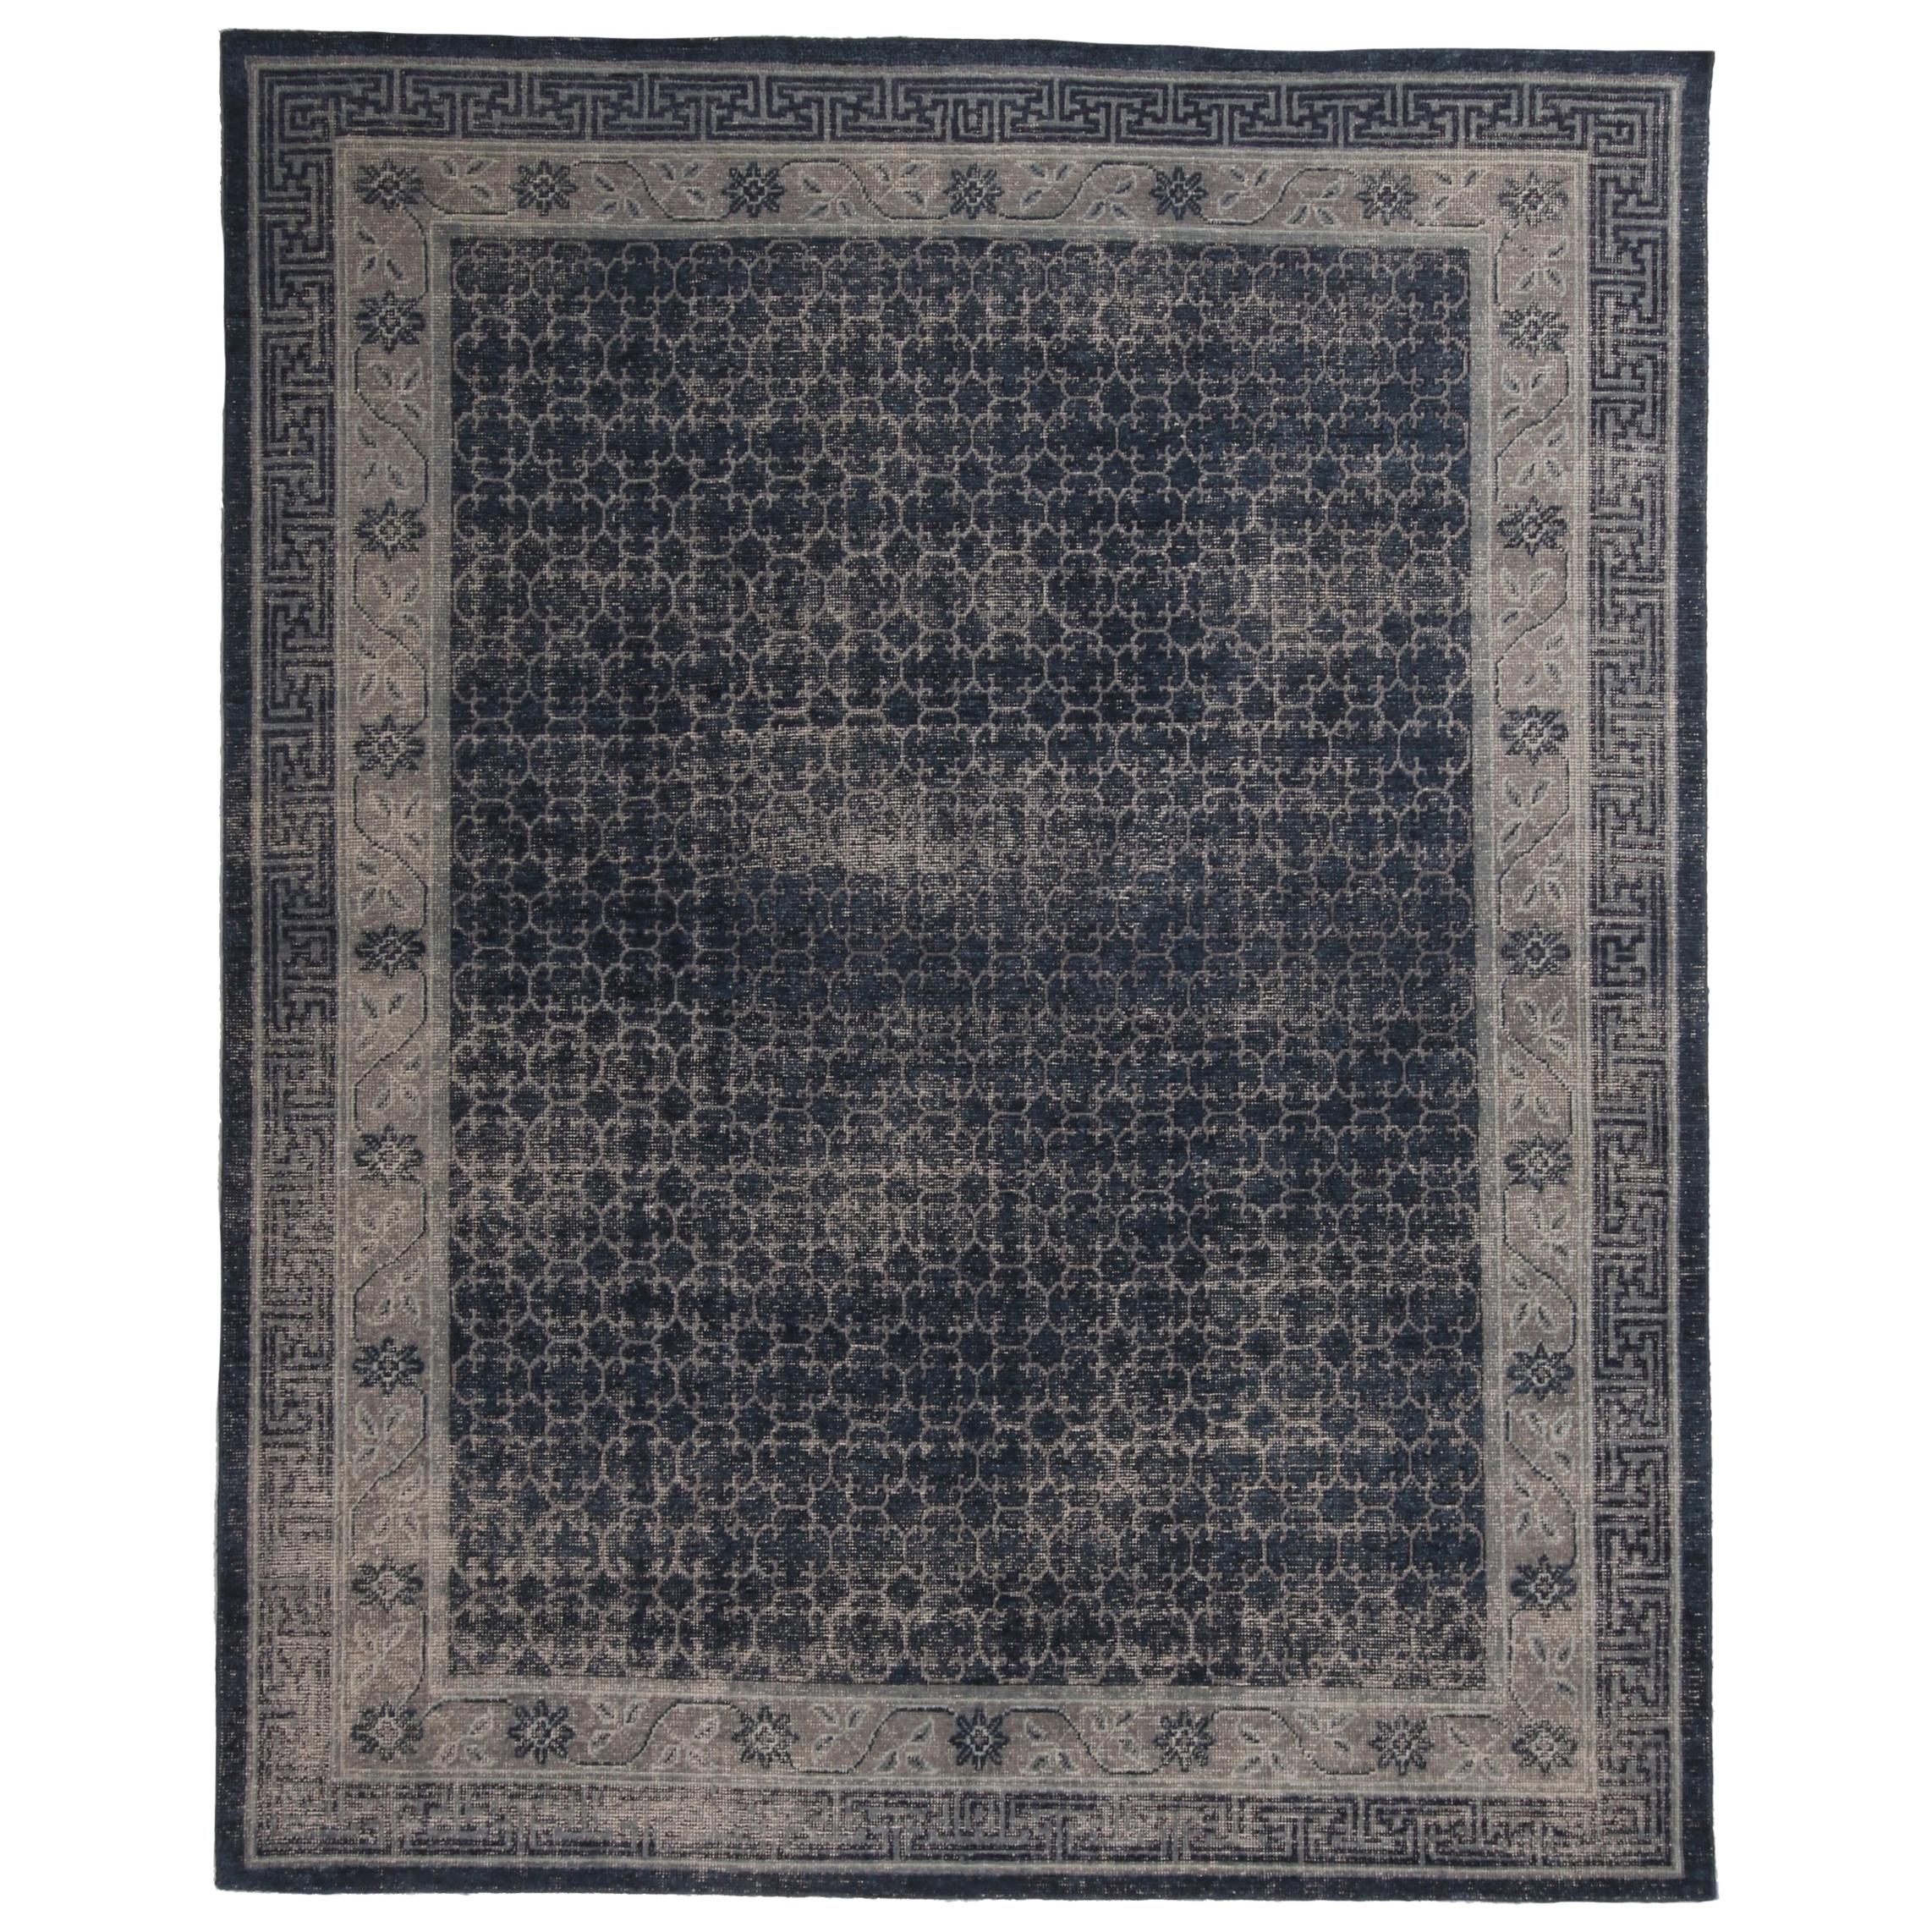 Rug & Kilim's Khotan Navy Smoke Blue Wool Rug from the Homage Collection